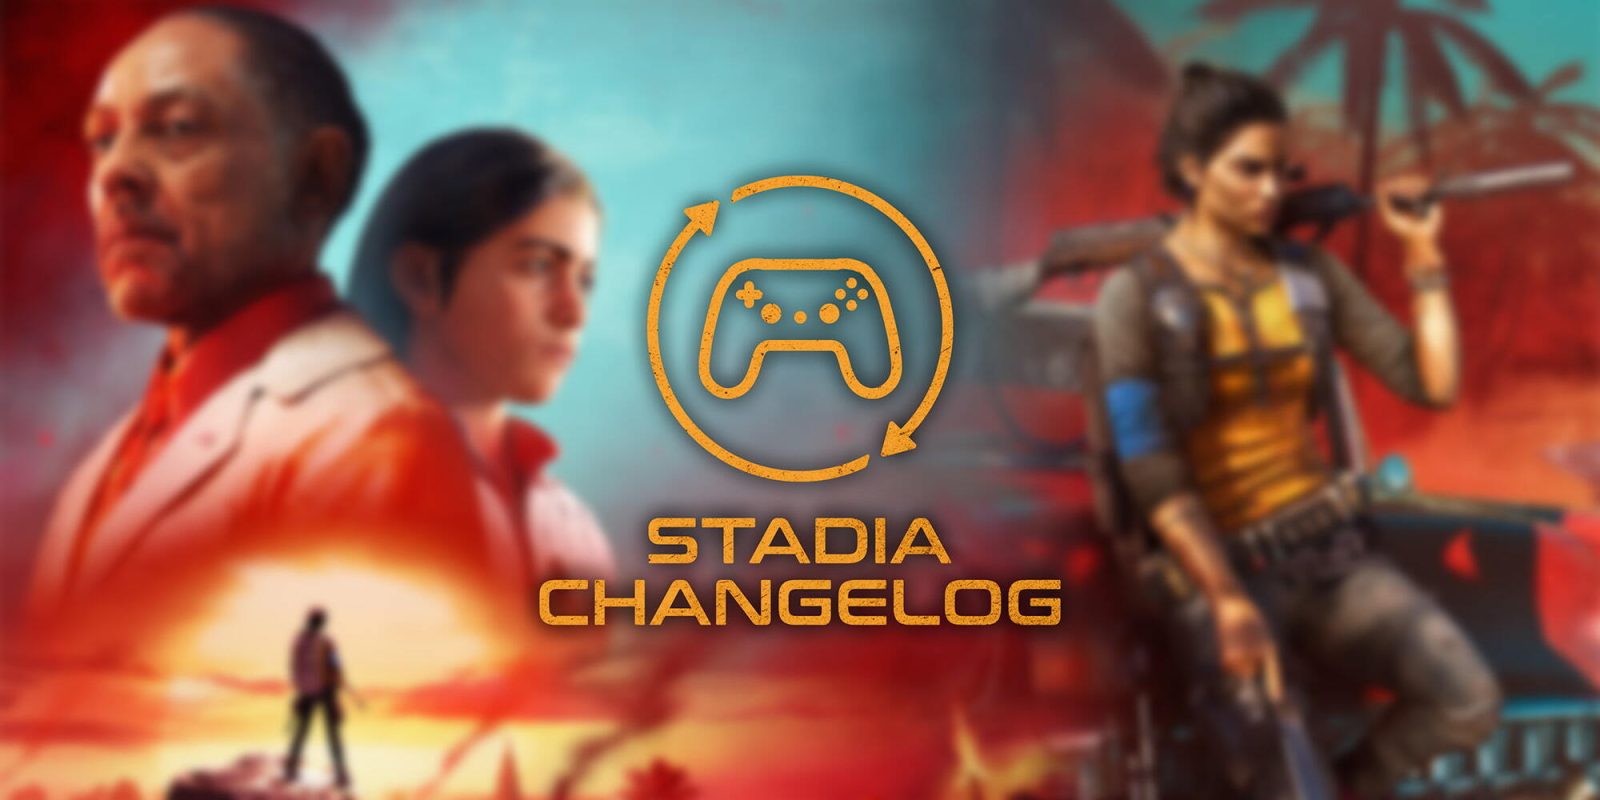 Stadia Changelog: Far Cry 6 goes free this weekend as a 2026 release is slated for Stadia